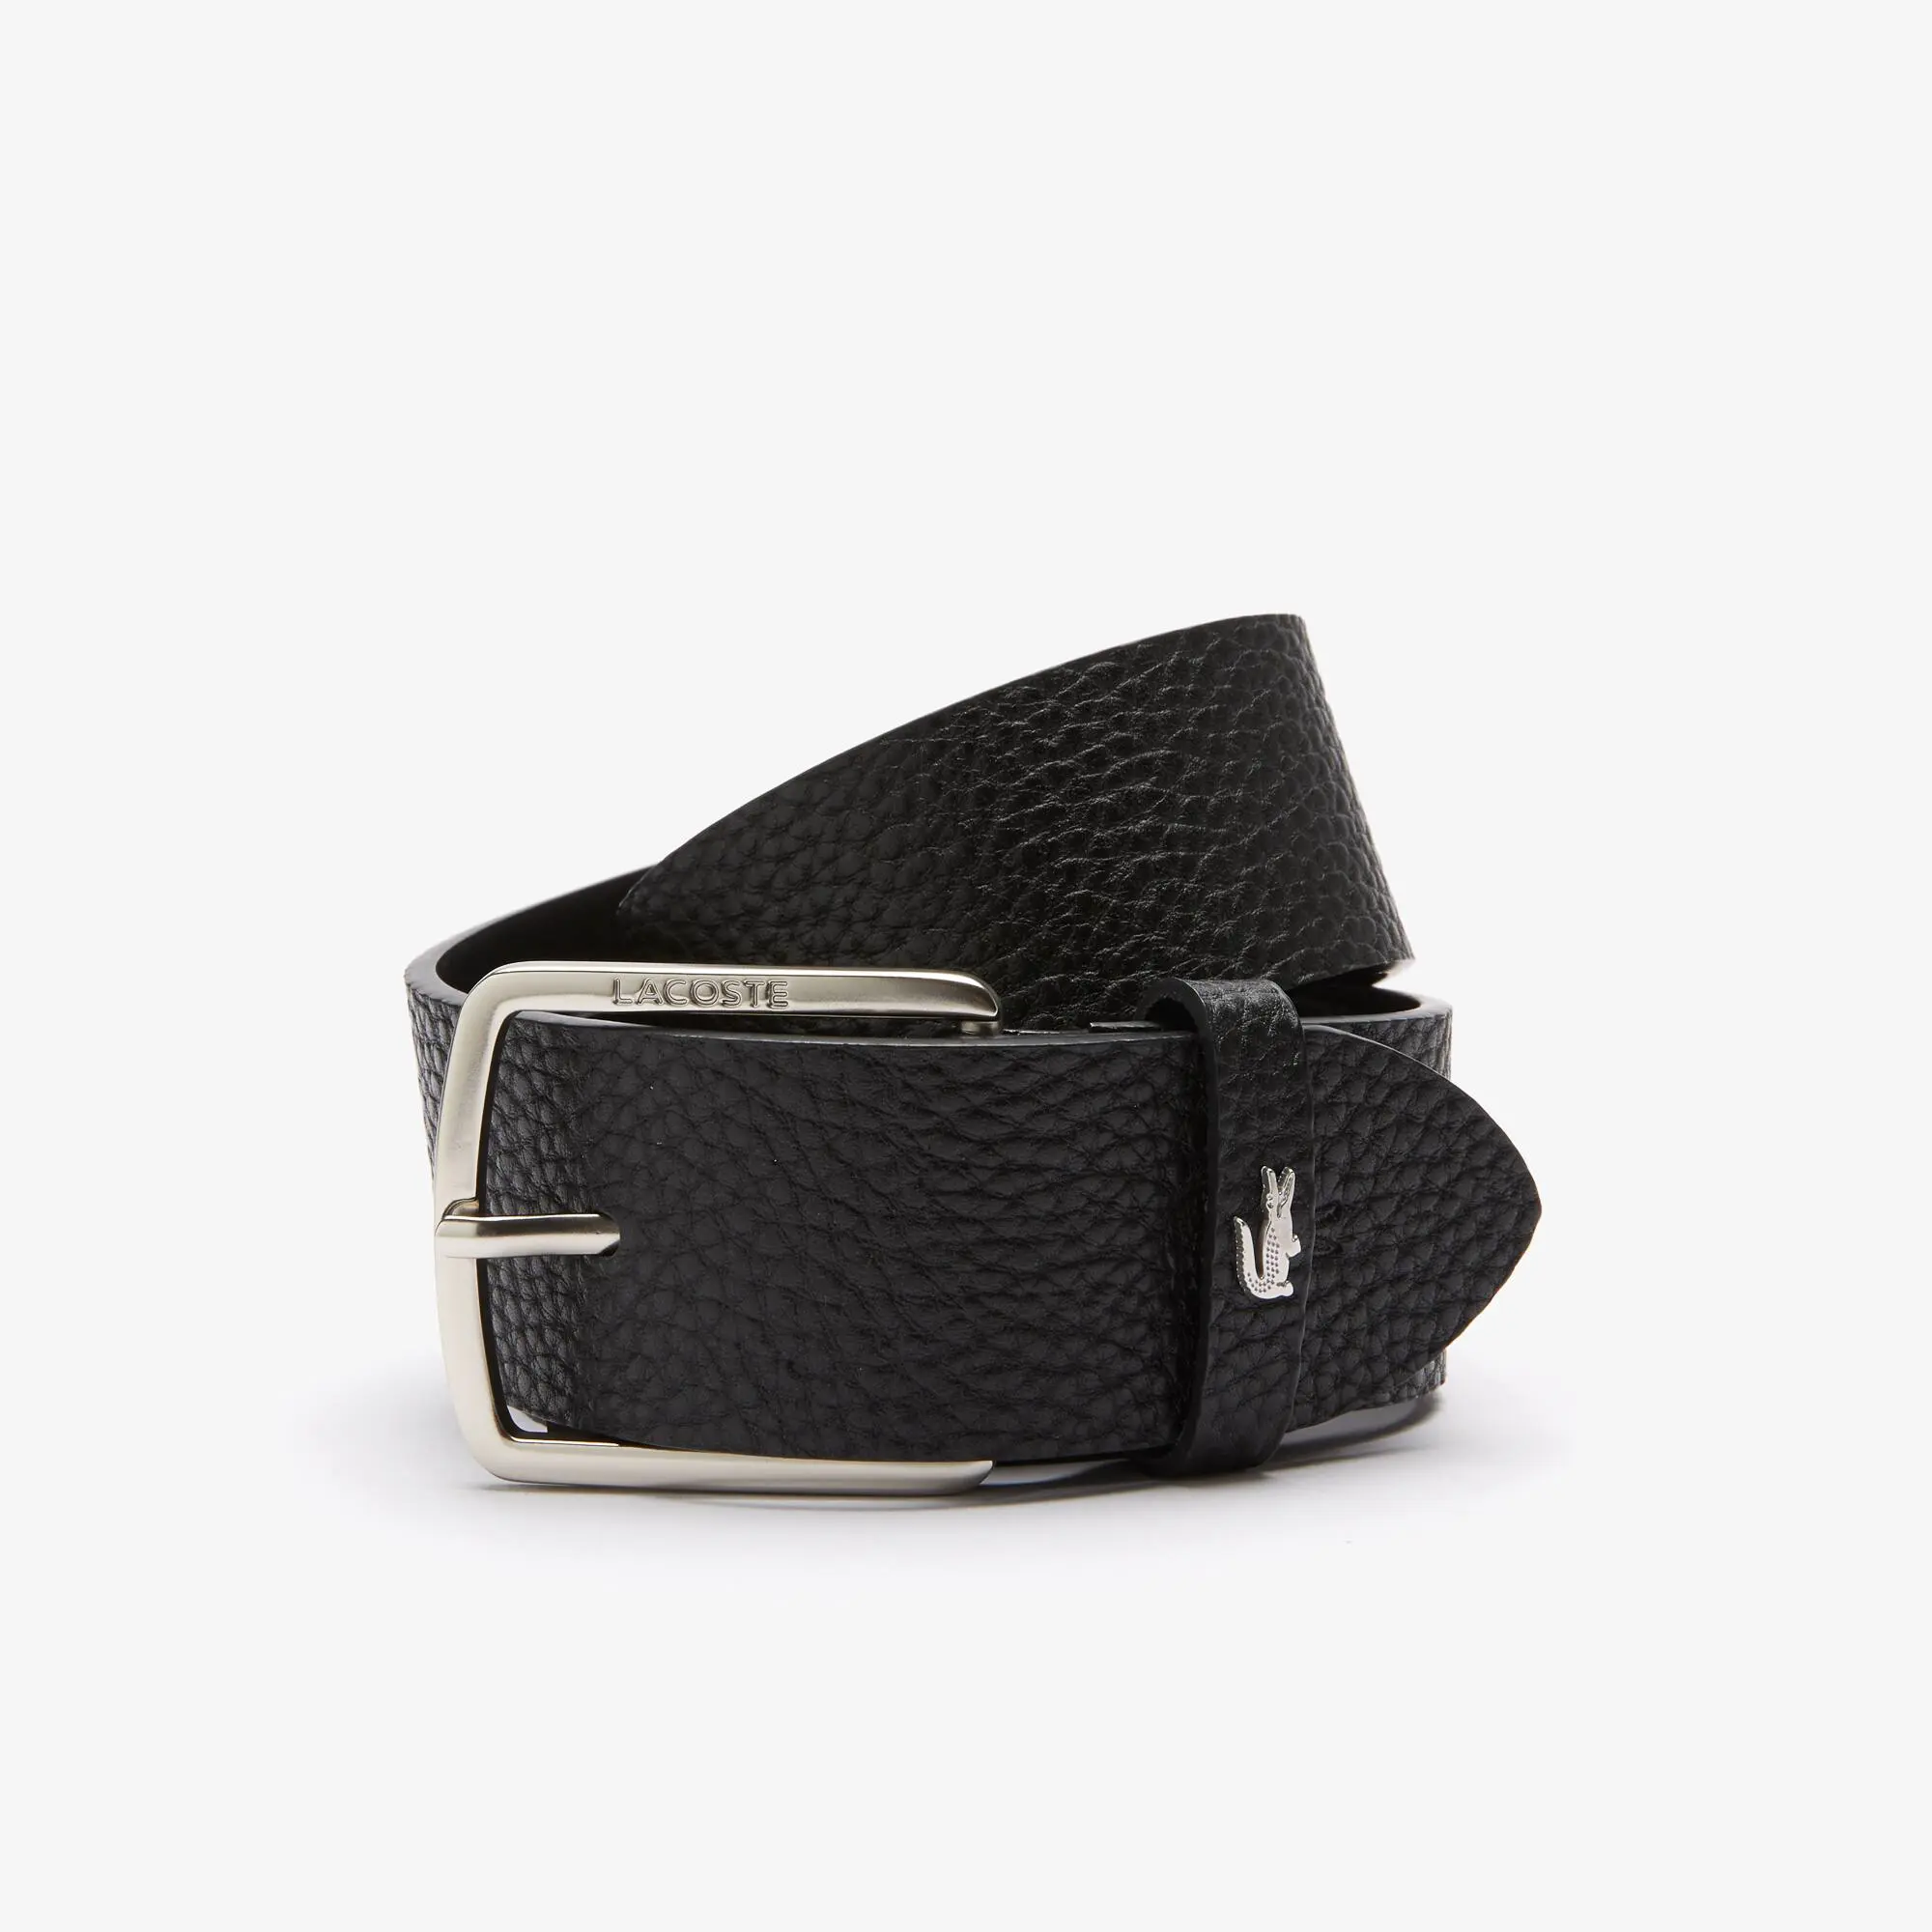 Lacoste Men's Lacoste Engraved Square Buckle Grained Leather Belt. 1